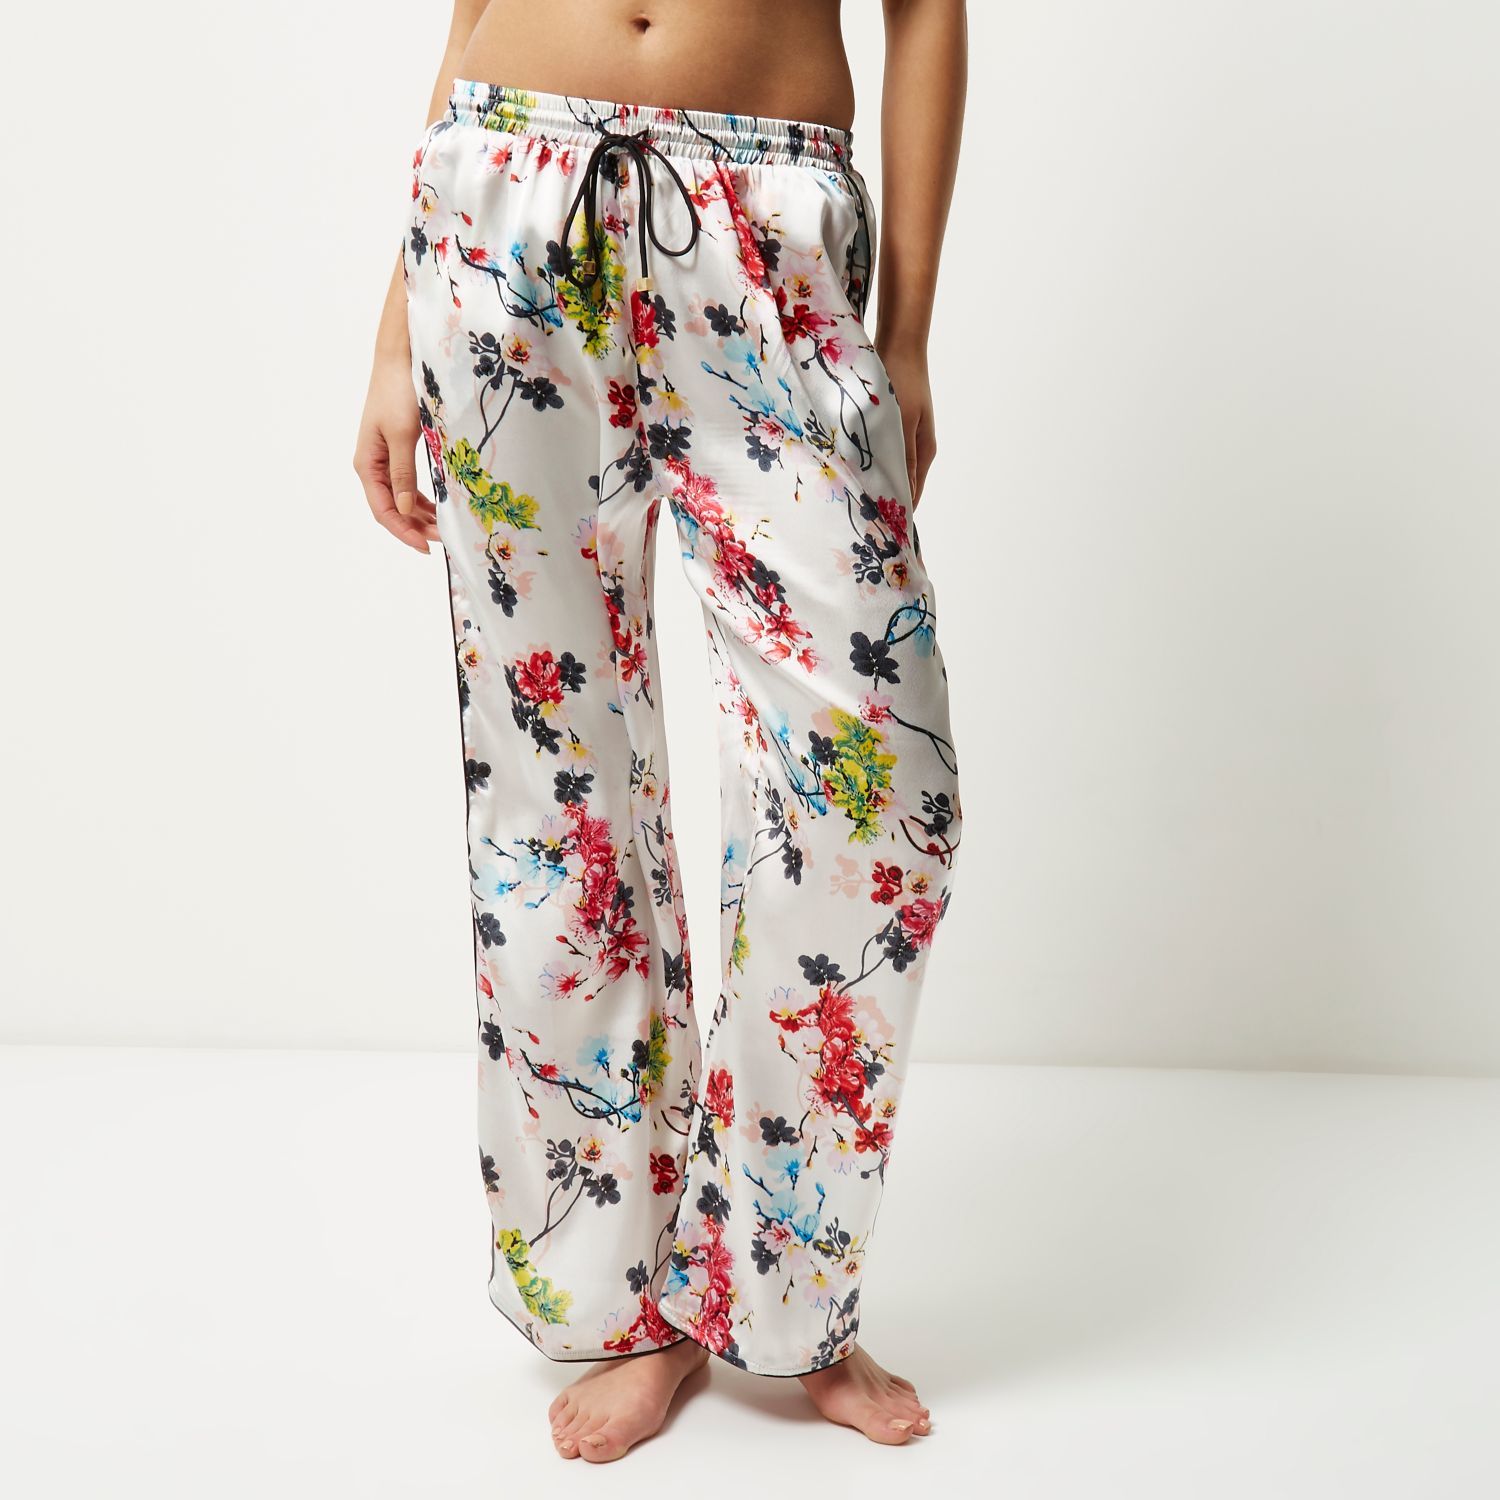 River Island White Floral Print Pajama Pants in White - Lyst